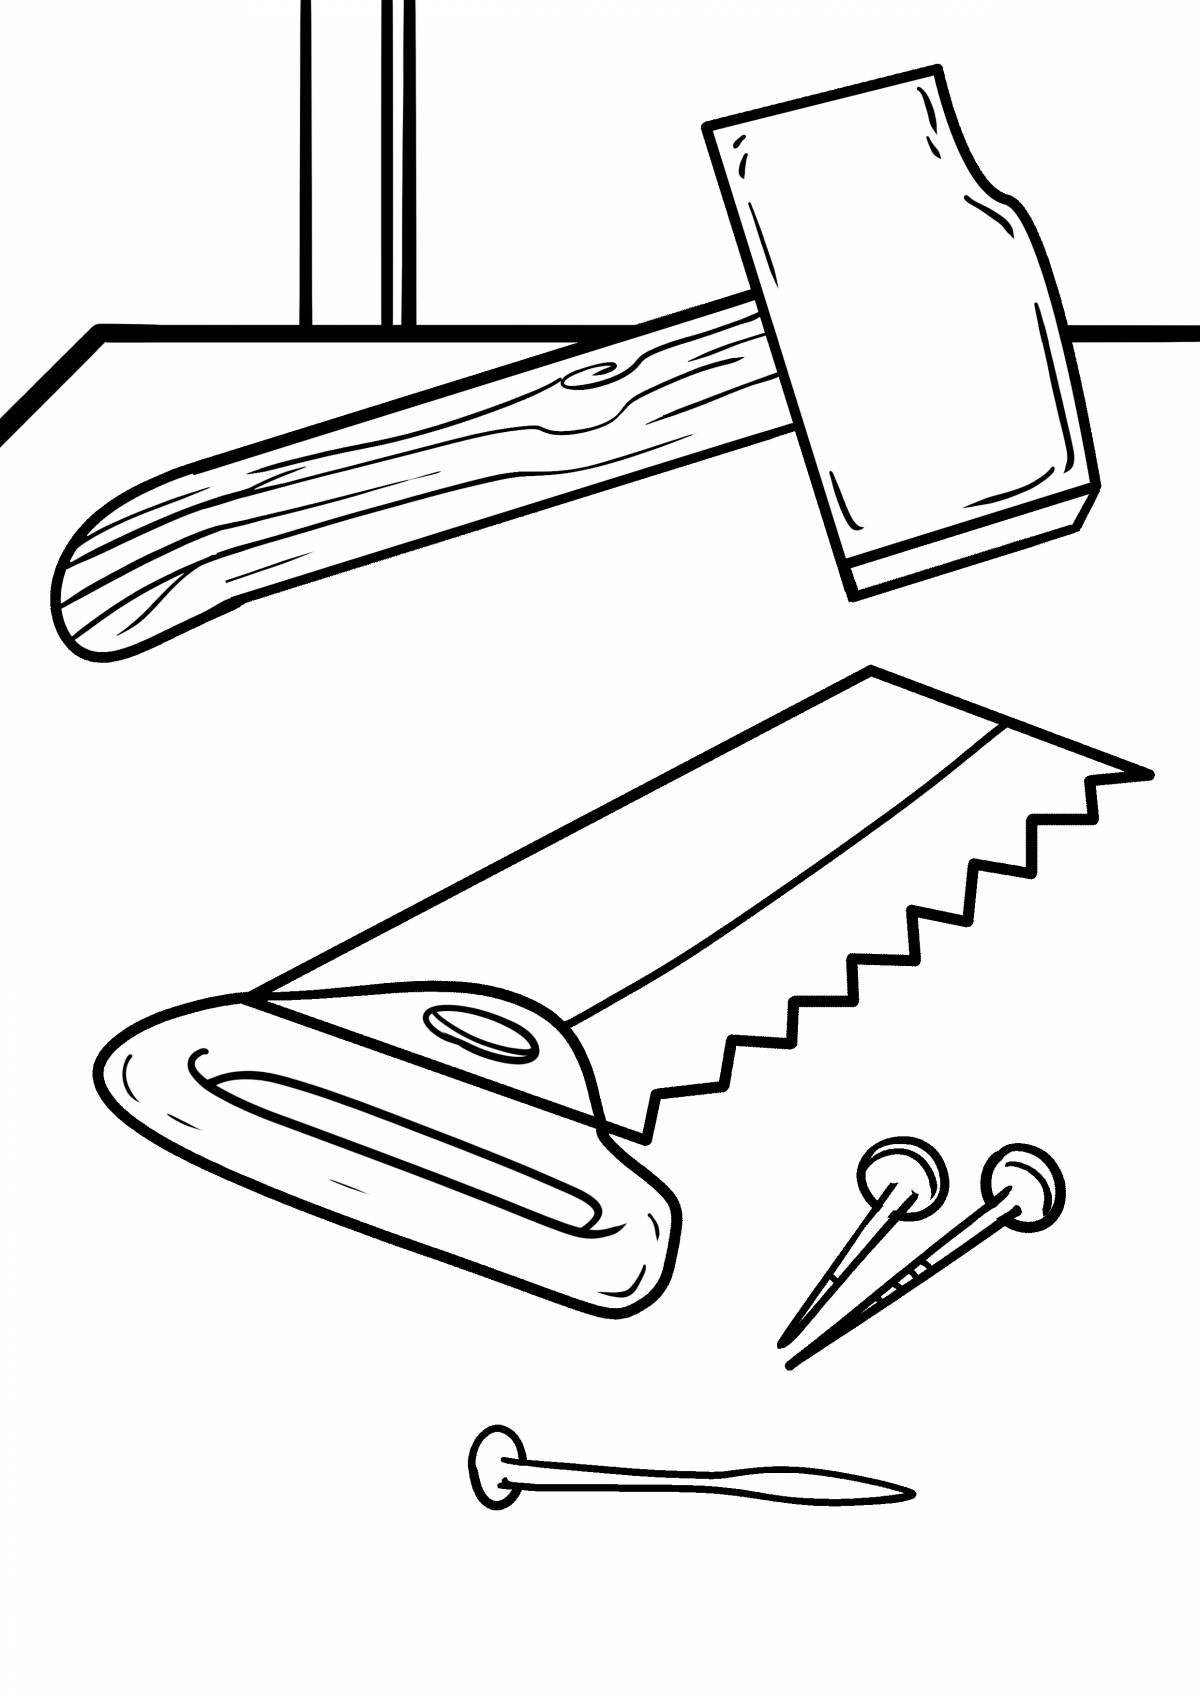 Fun tools coloring page for 4-5 year olds